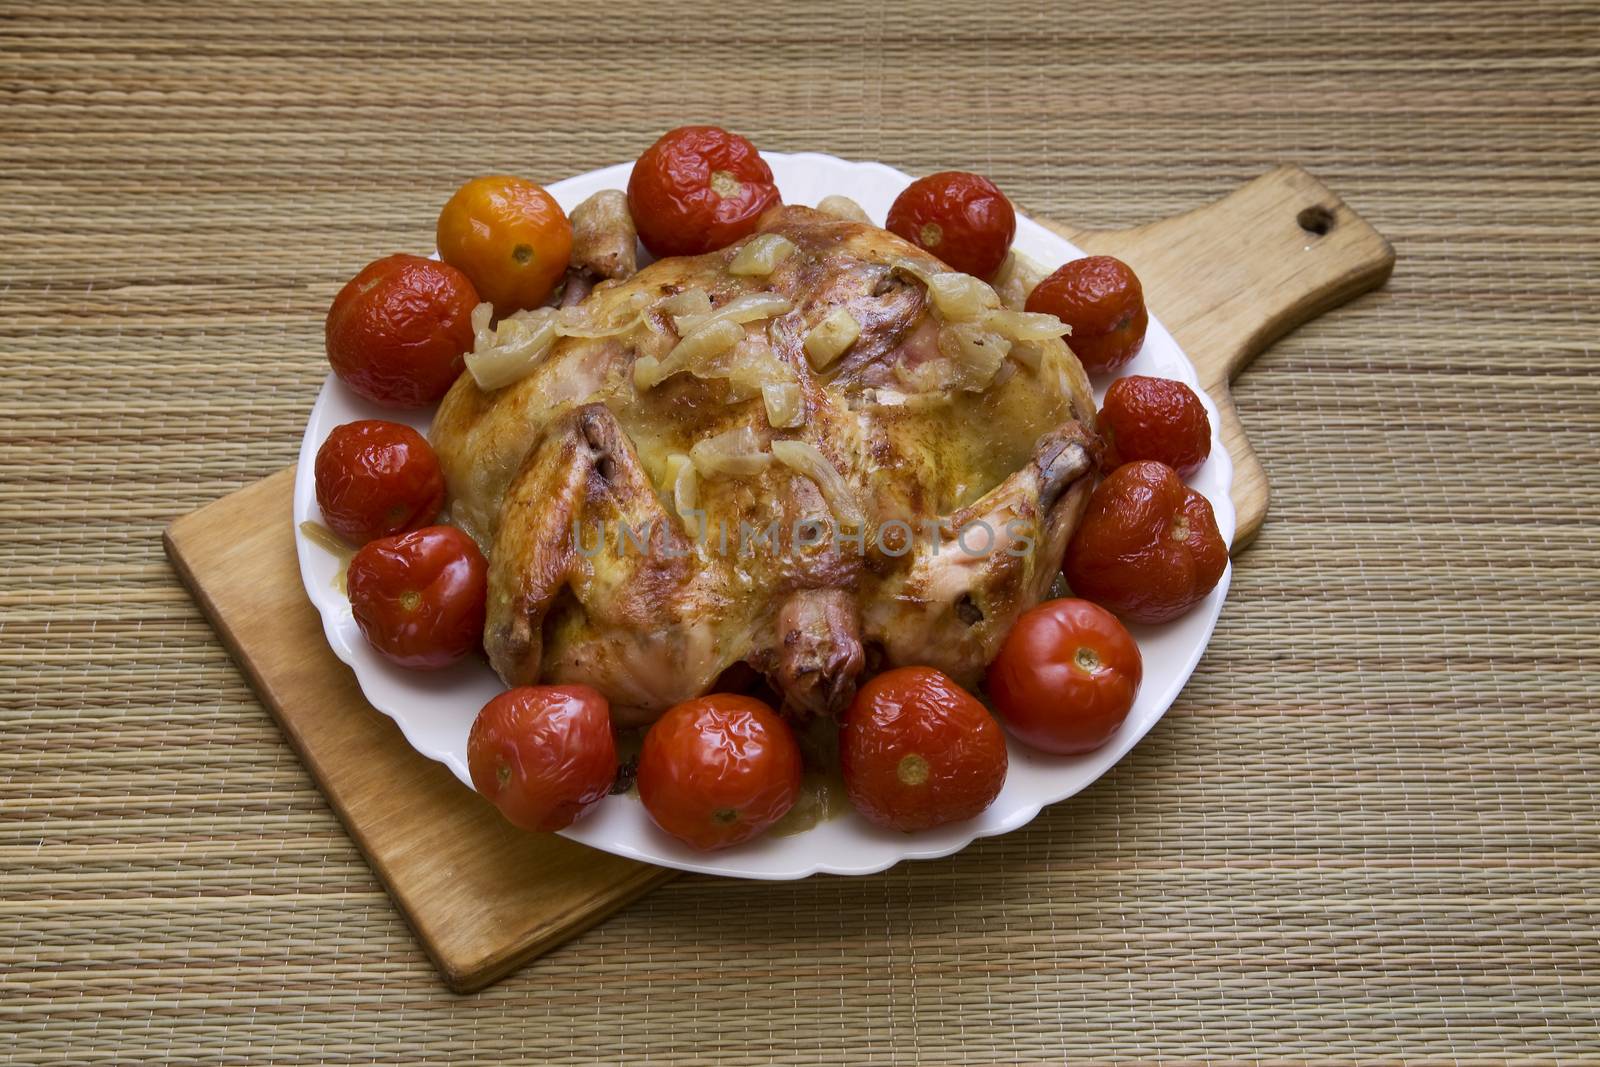 baked chicken for Christmas dinner, festive table setting  by foryouinf